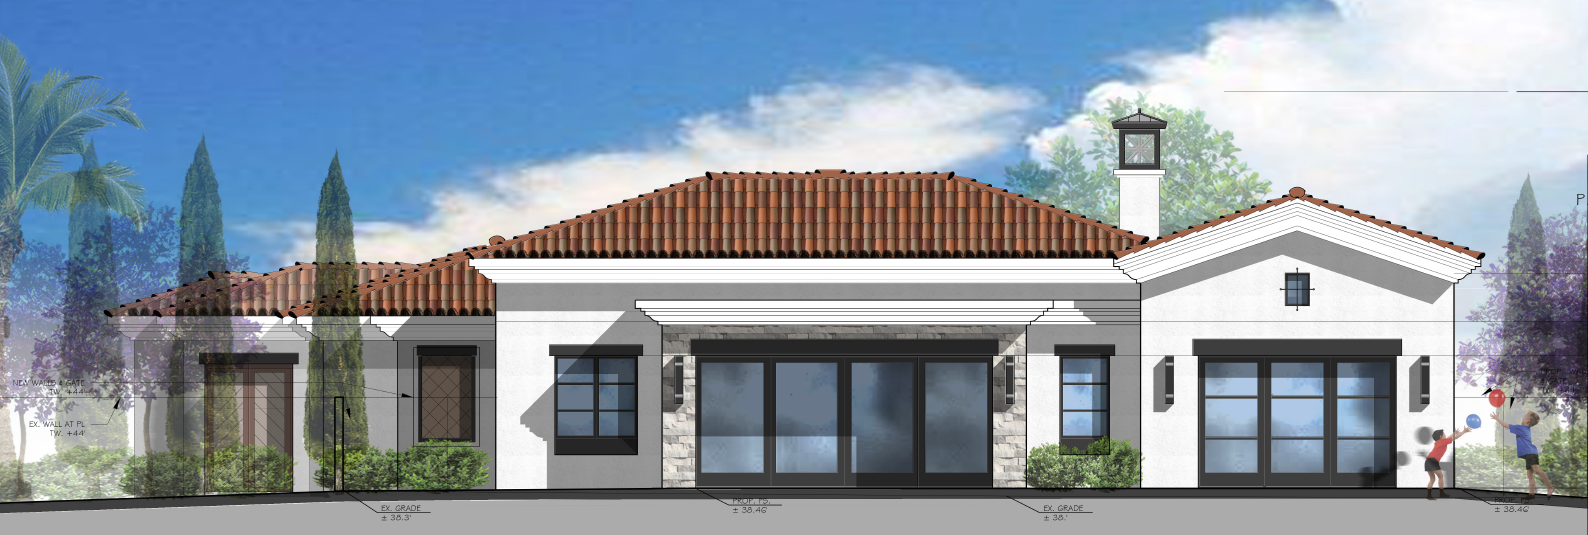 03-yng-architects-on-the-boards-la-quinta-lot-23-west-elevation.png